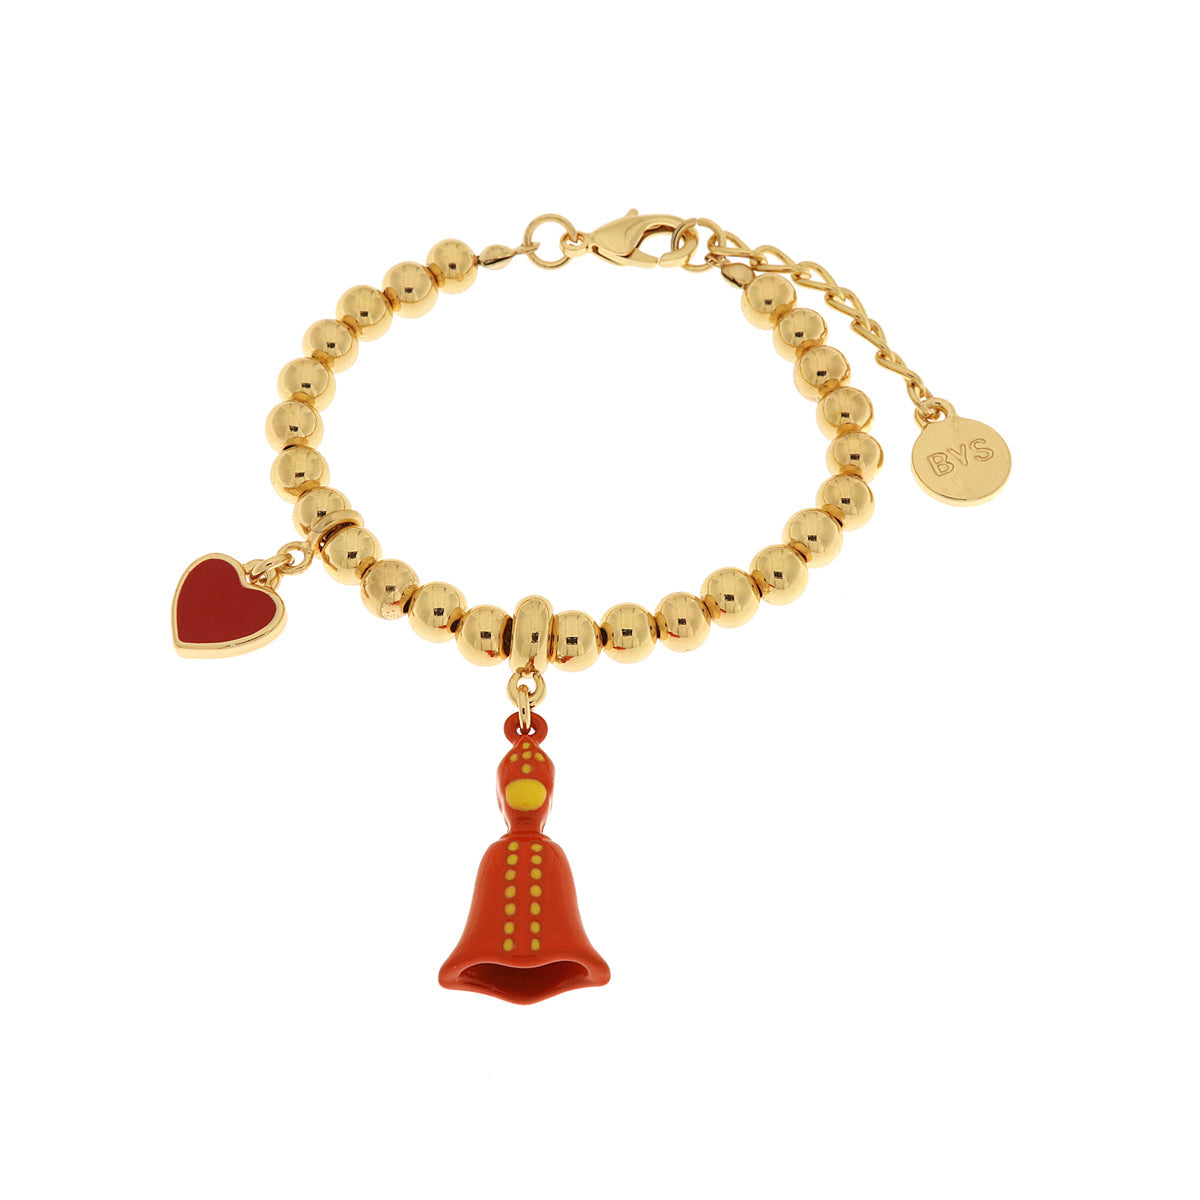 Metal bracelet with San Gennaro red pendant and red heart